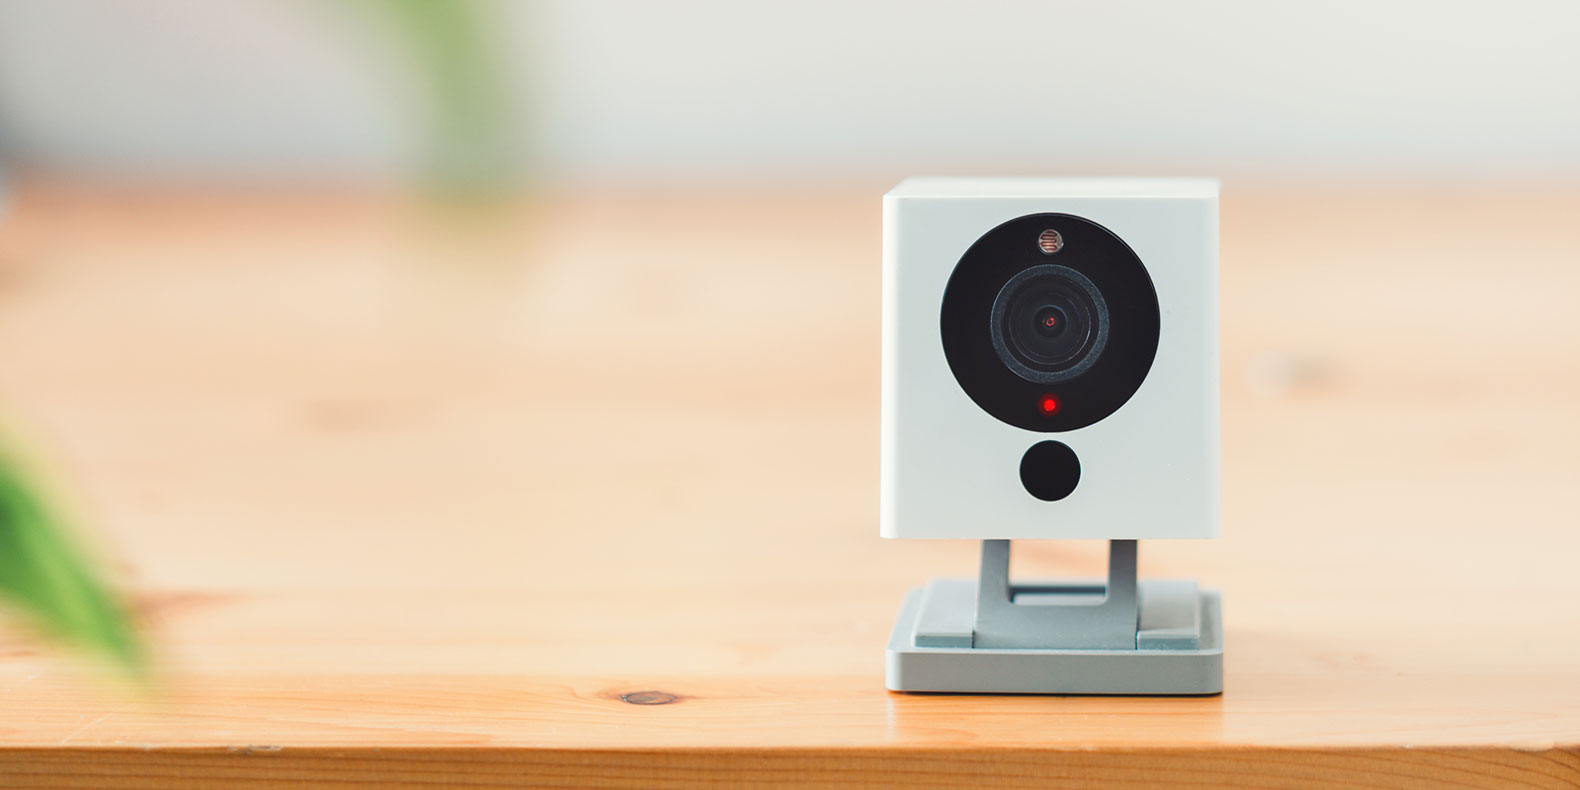 How to Mount Security Cameras Without Screws